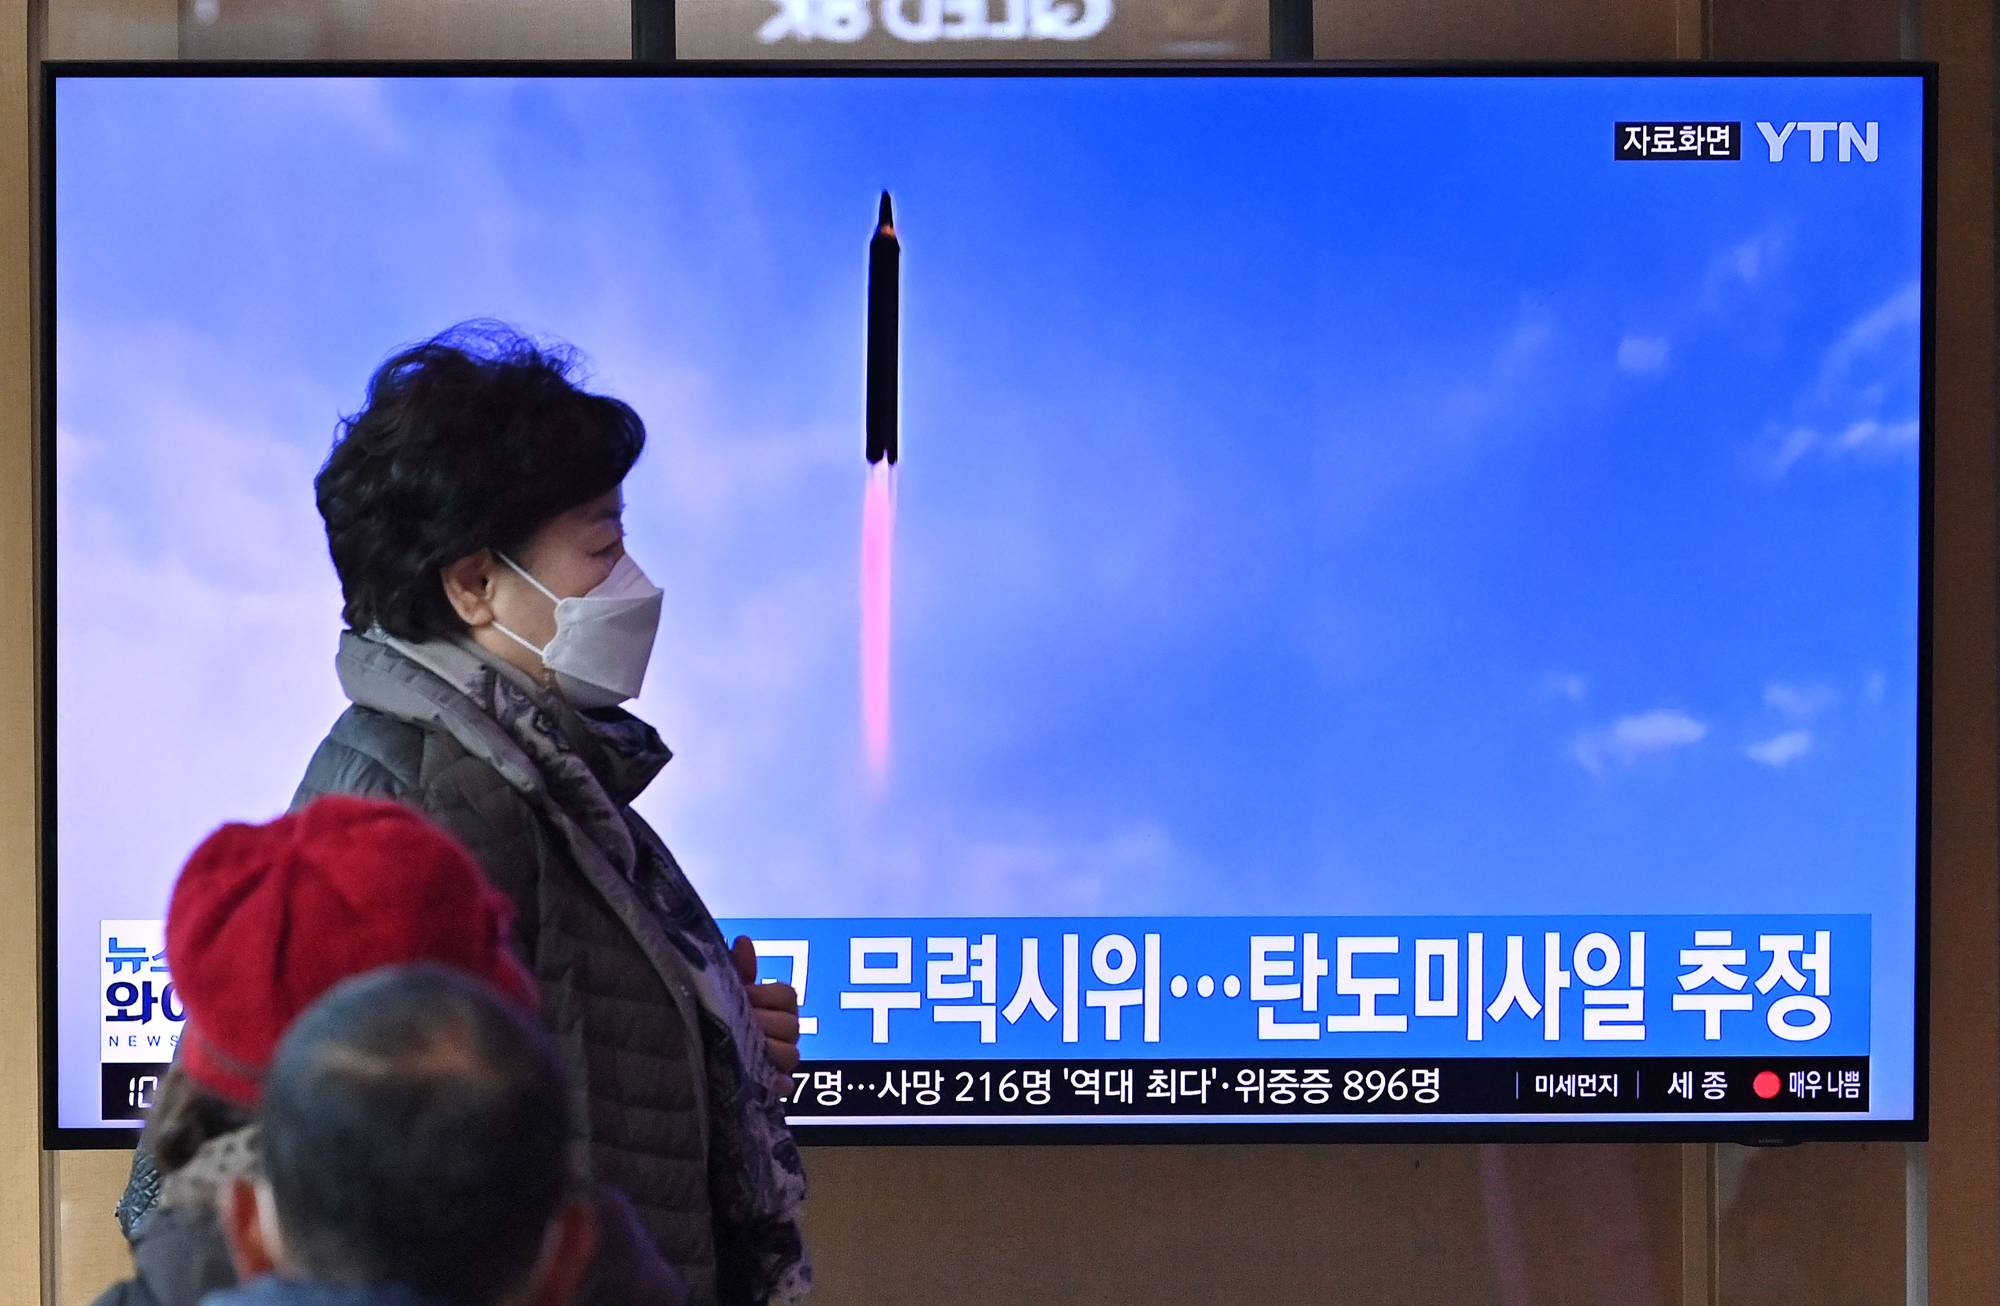 North Korea Conducts Its Ninth Missile Test Of 22 The Japan Times